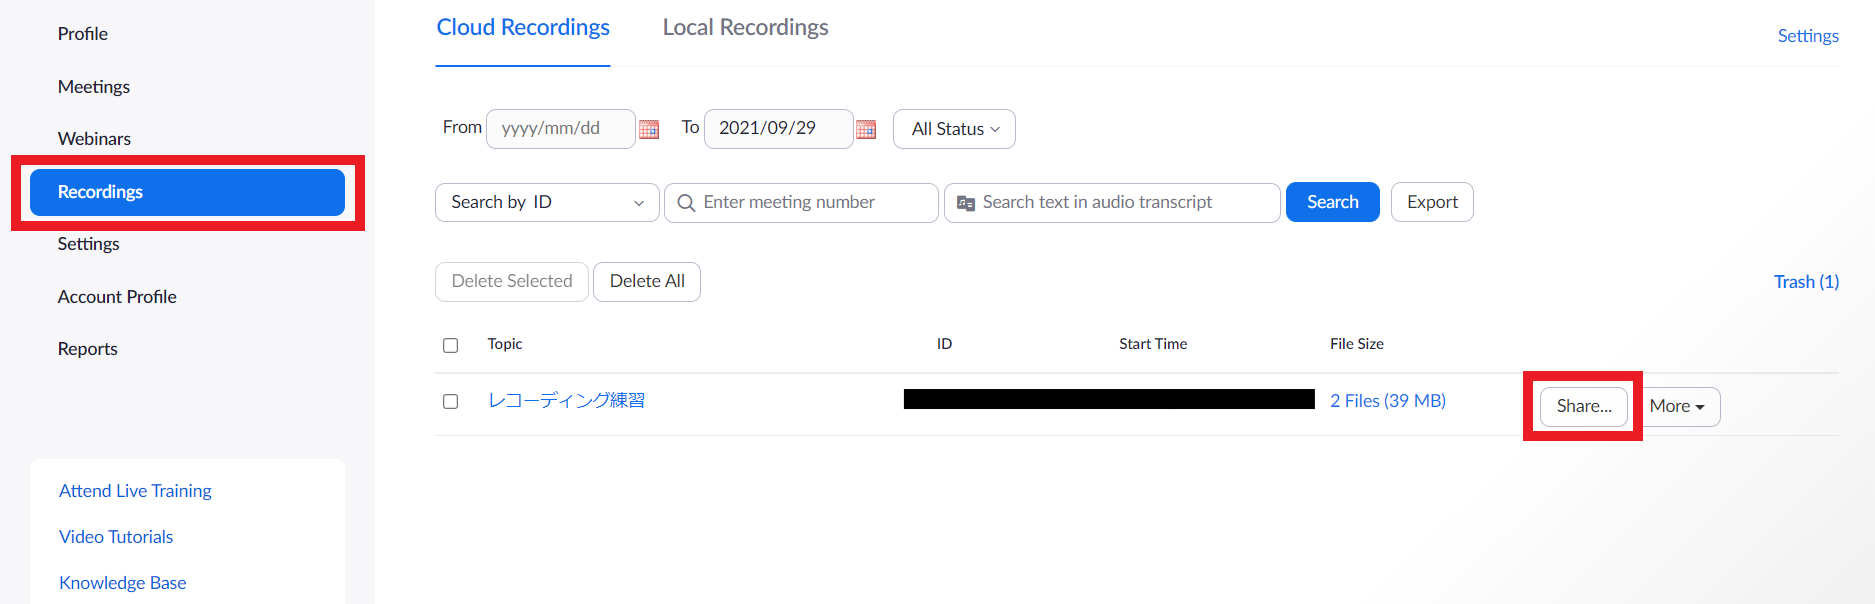 Open the "Share" menu of the recording you want to stop sharing